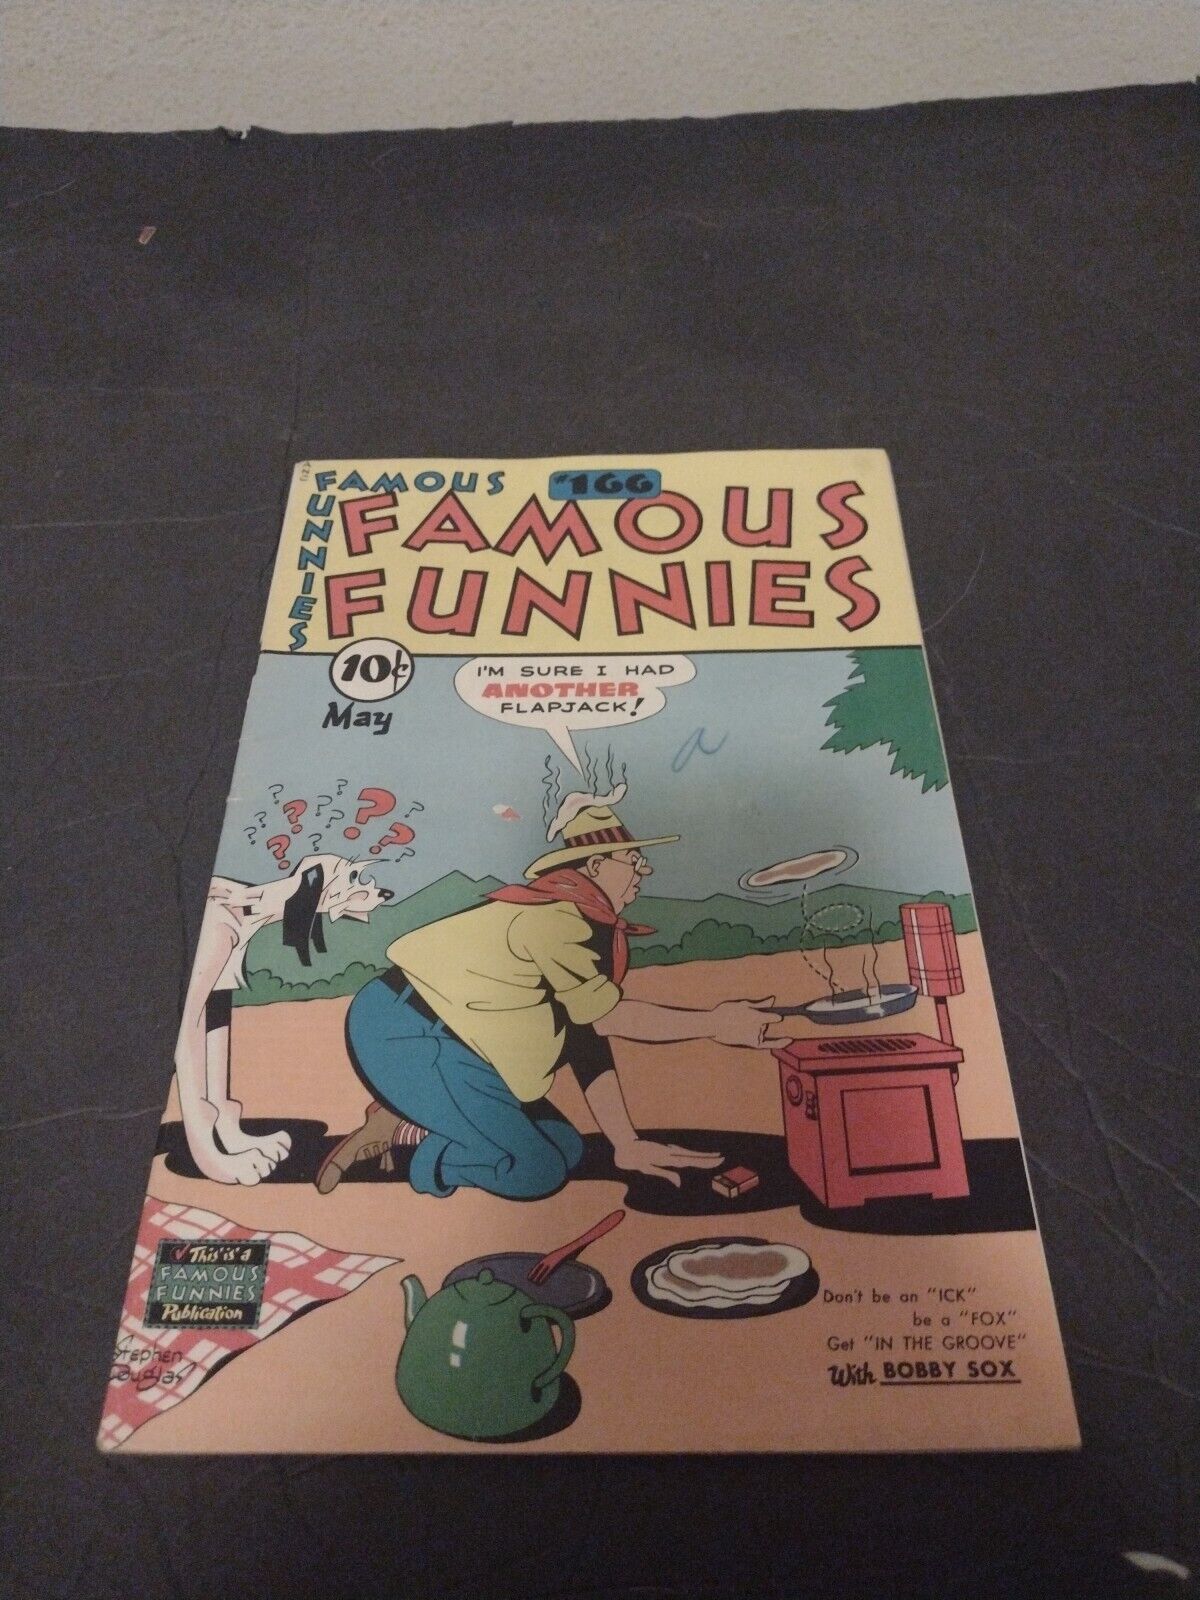 FAMOUS FUNNIES COMIC BOOK #166 (1948) (V.F.) NICE WHITE PAGES C.G.C MATERIAL 